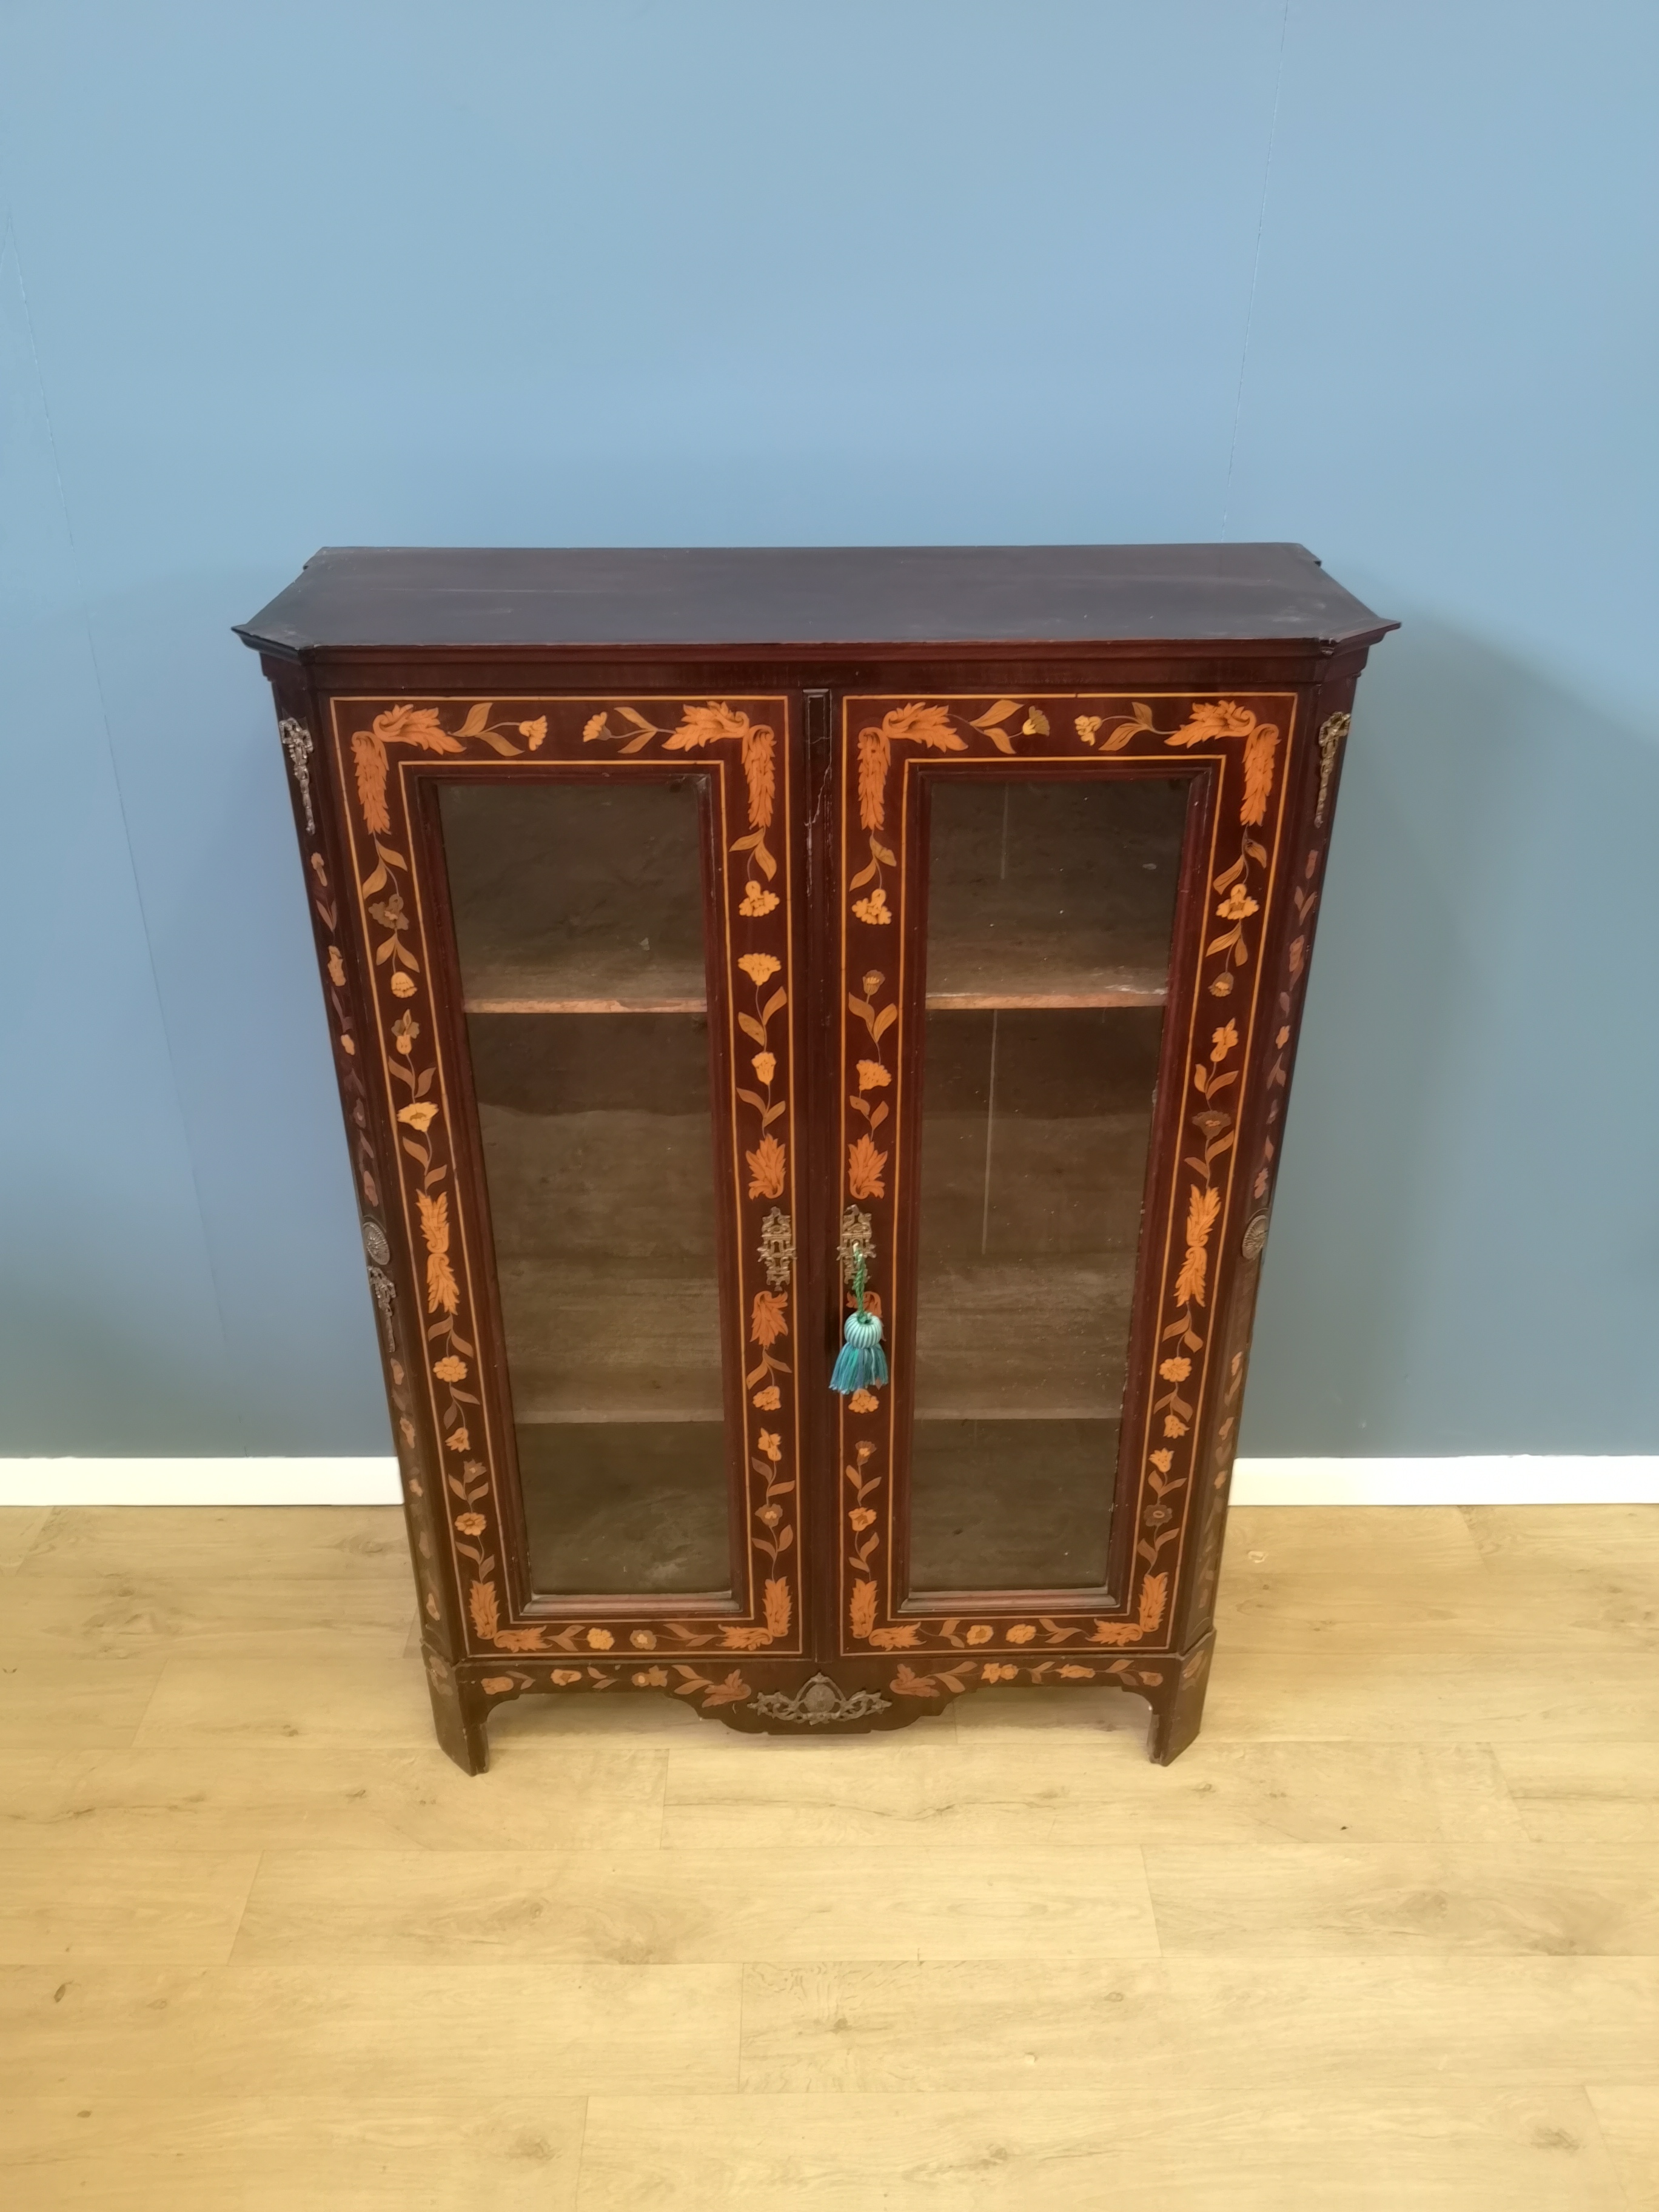 Mahogany glass fronted bookcase - Image 2 of 6